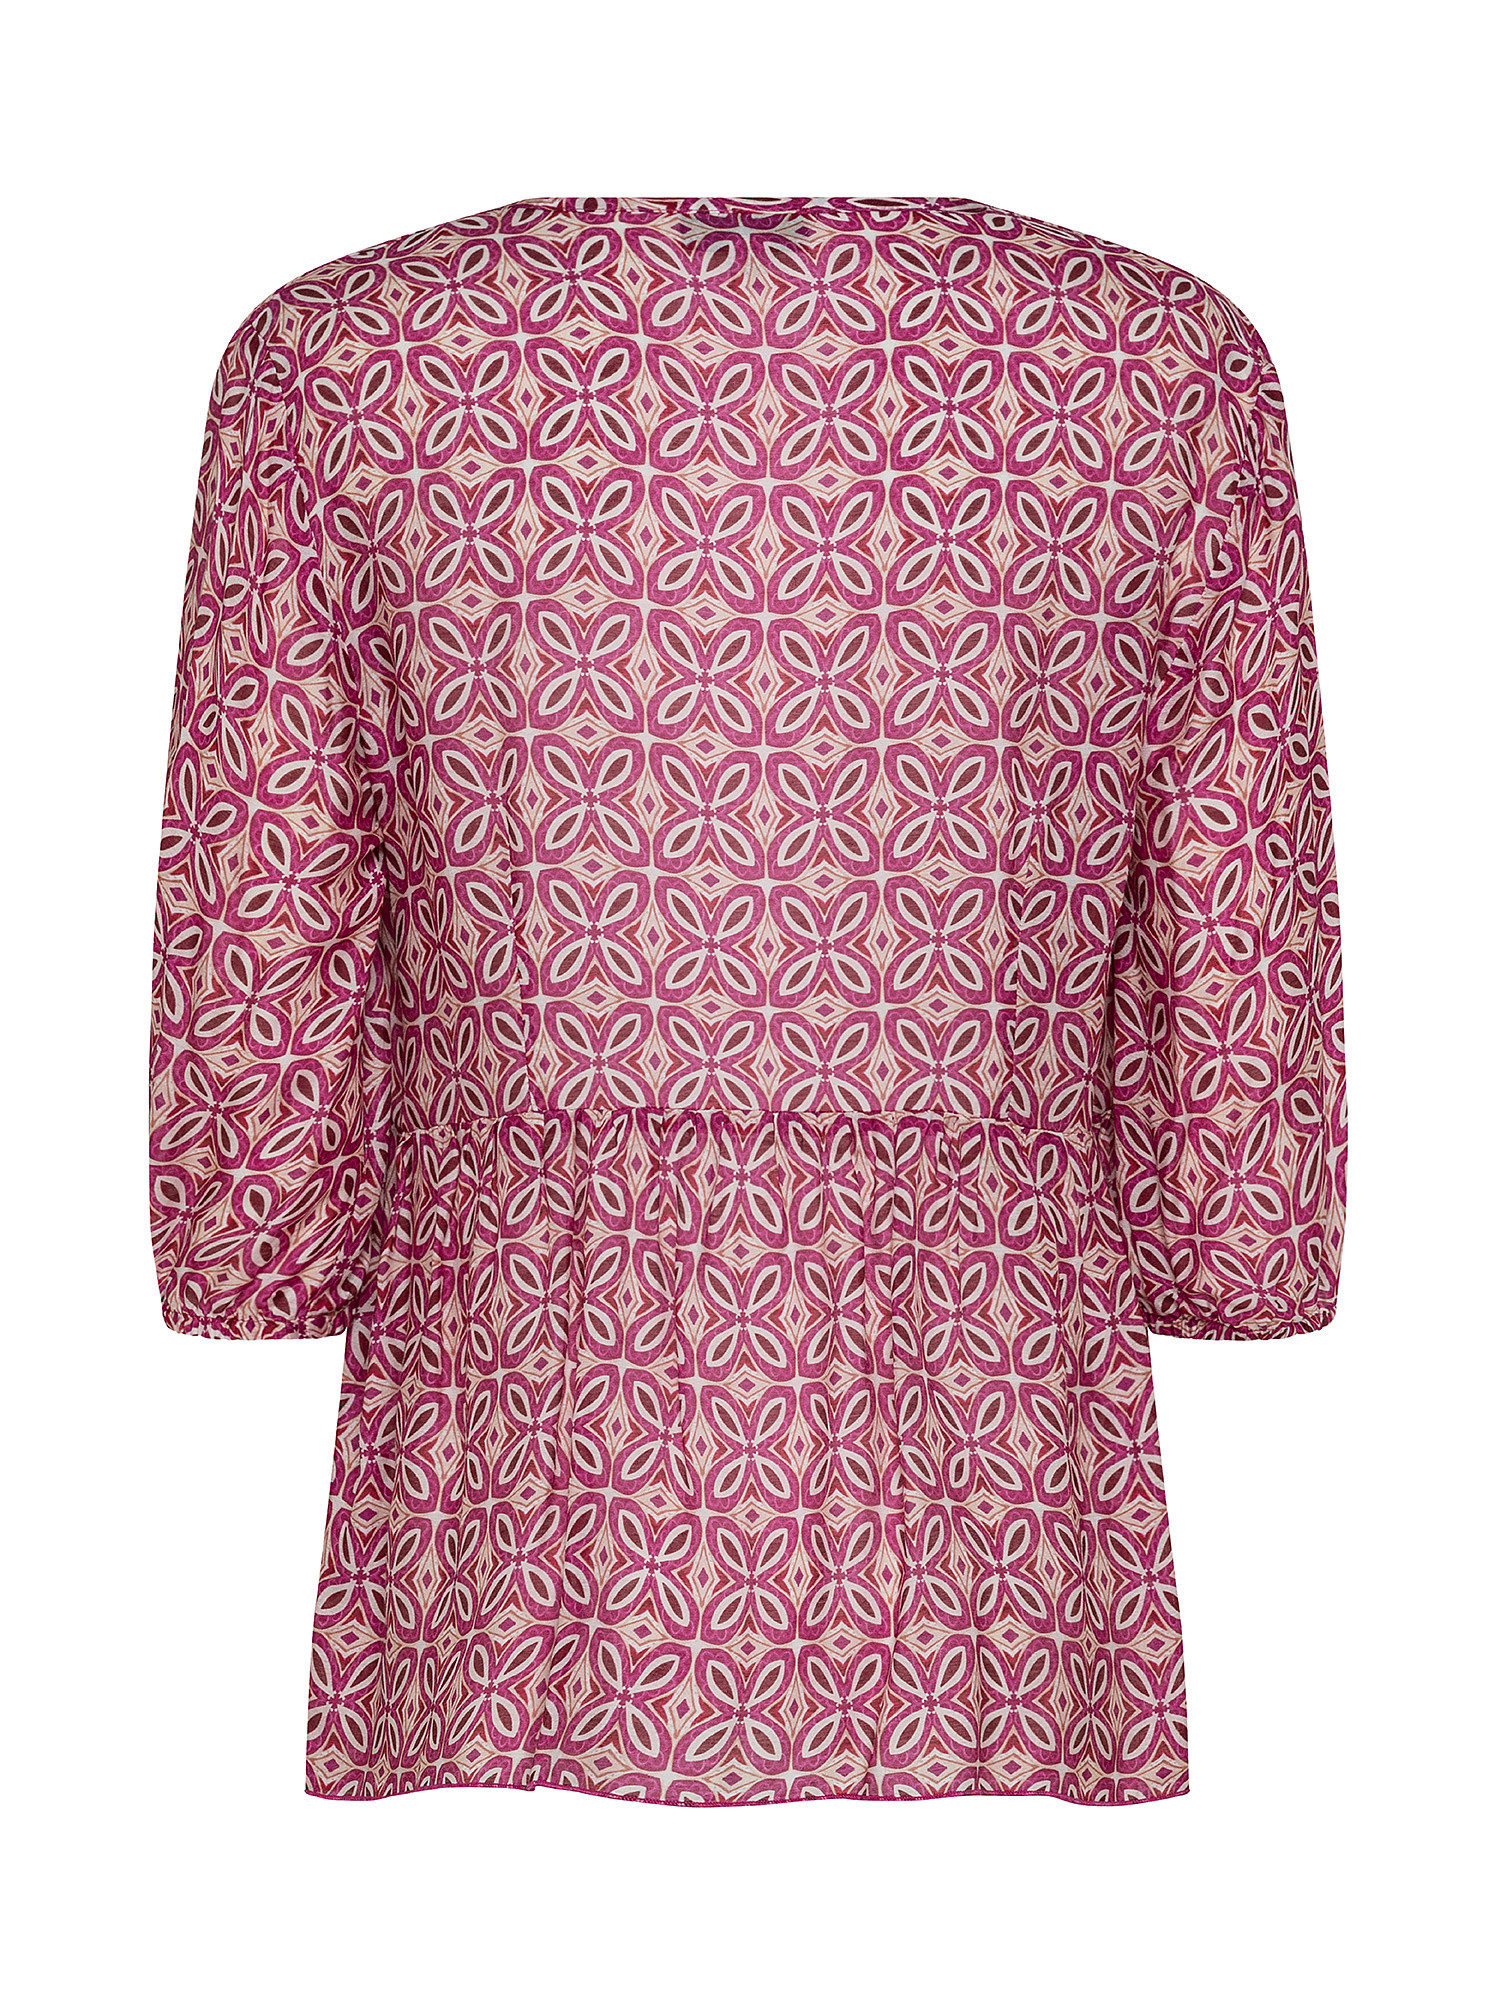 Printed blouse, Pink Fuchsia, large image number 1